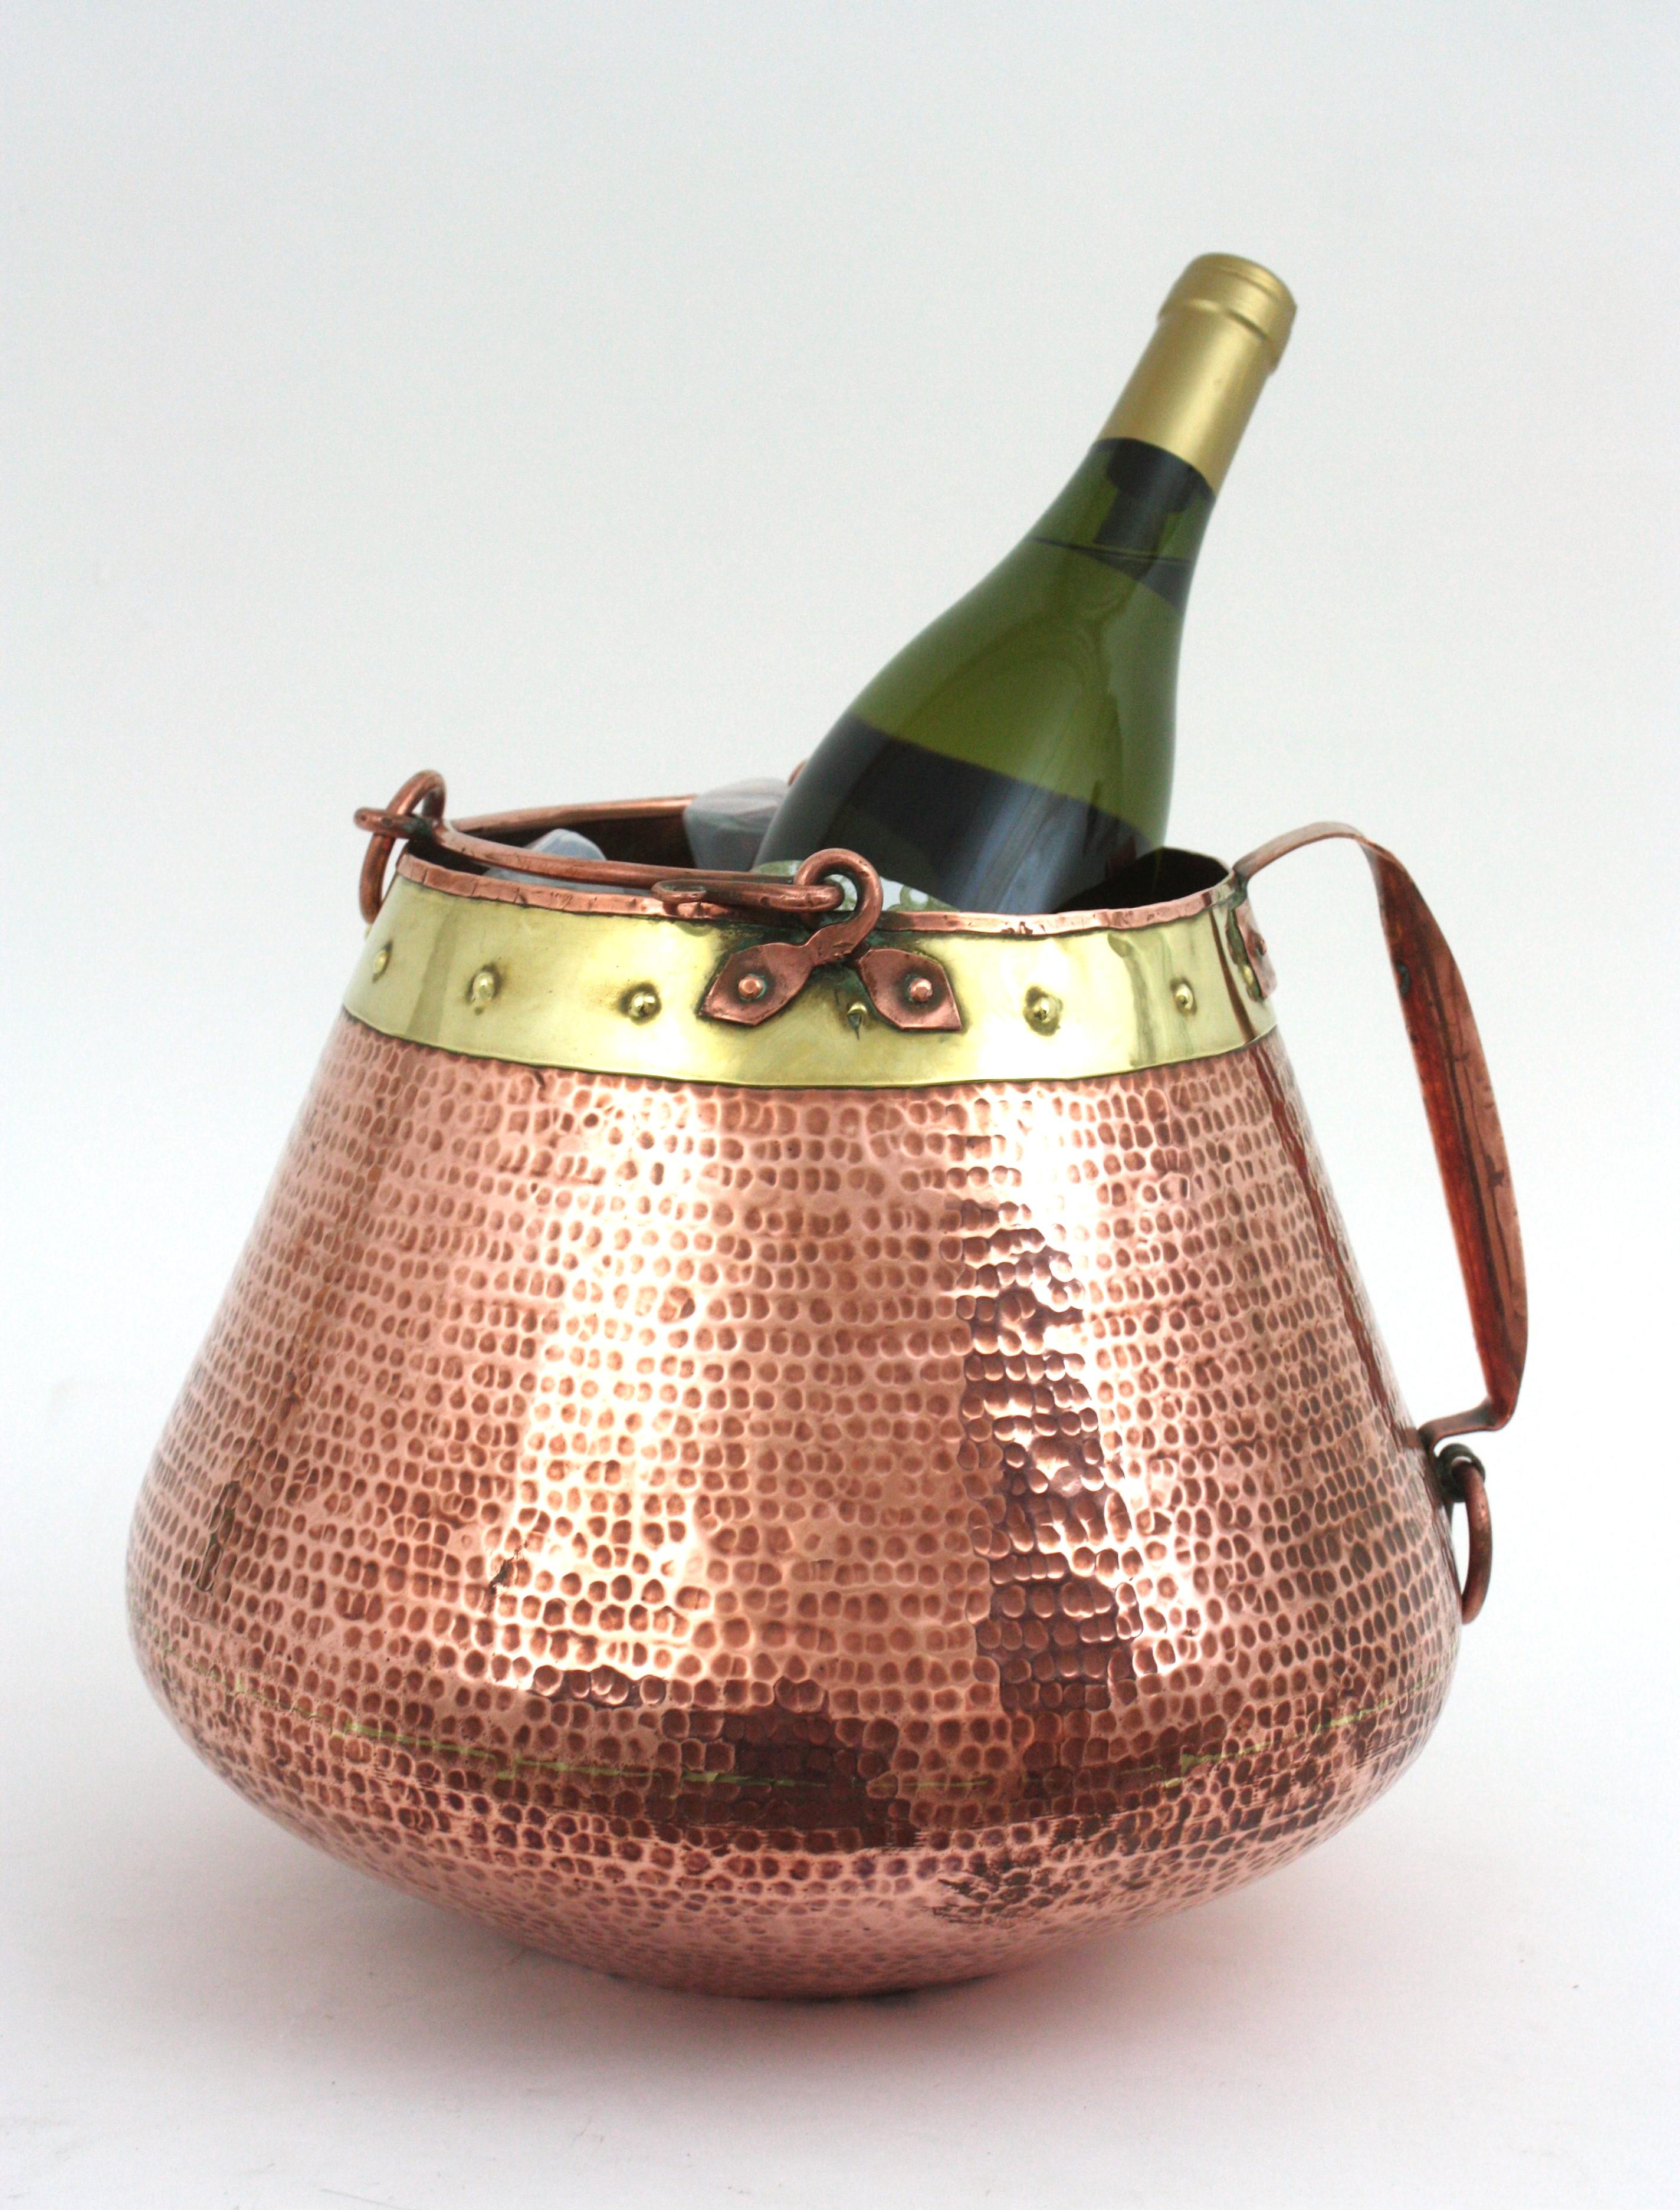 French Champagne Cooler Ice Bucket with Single Handle, Copper and Brass In Good Condition For Sale In Barcelona, ES